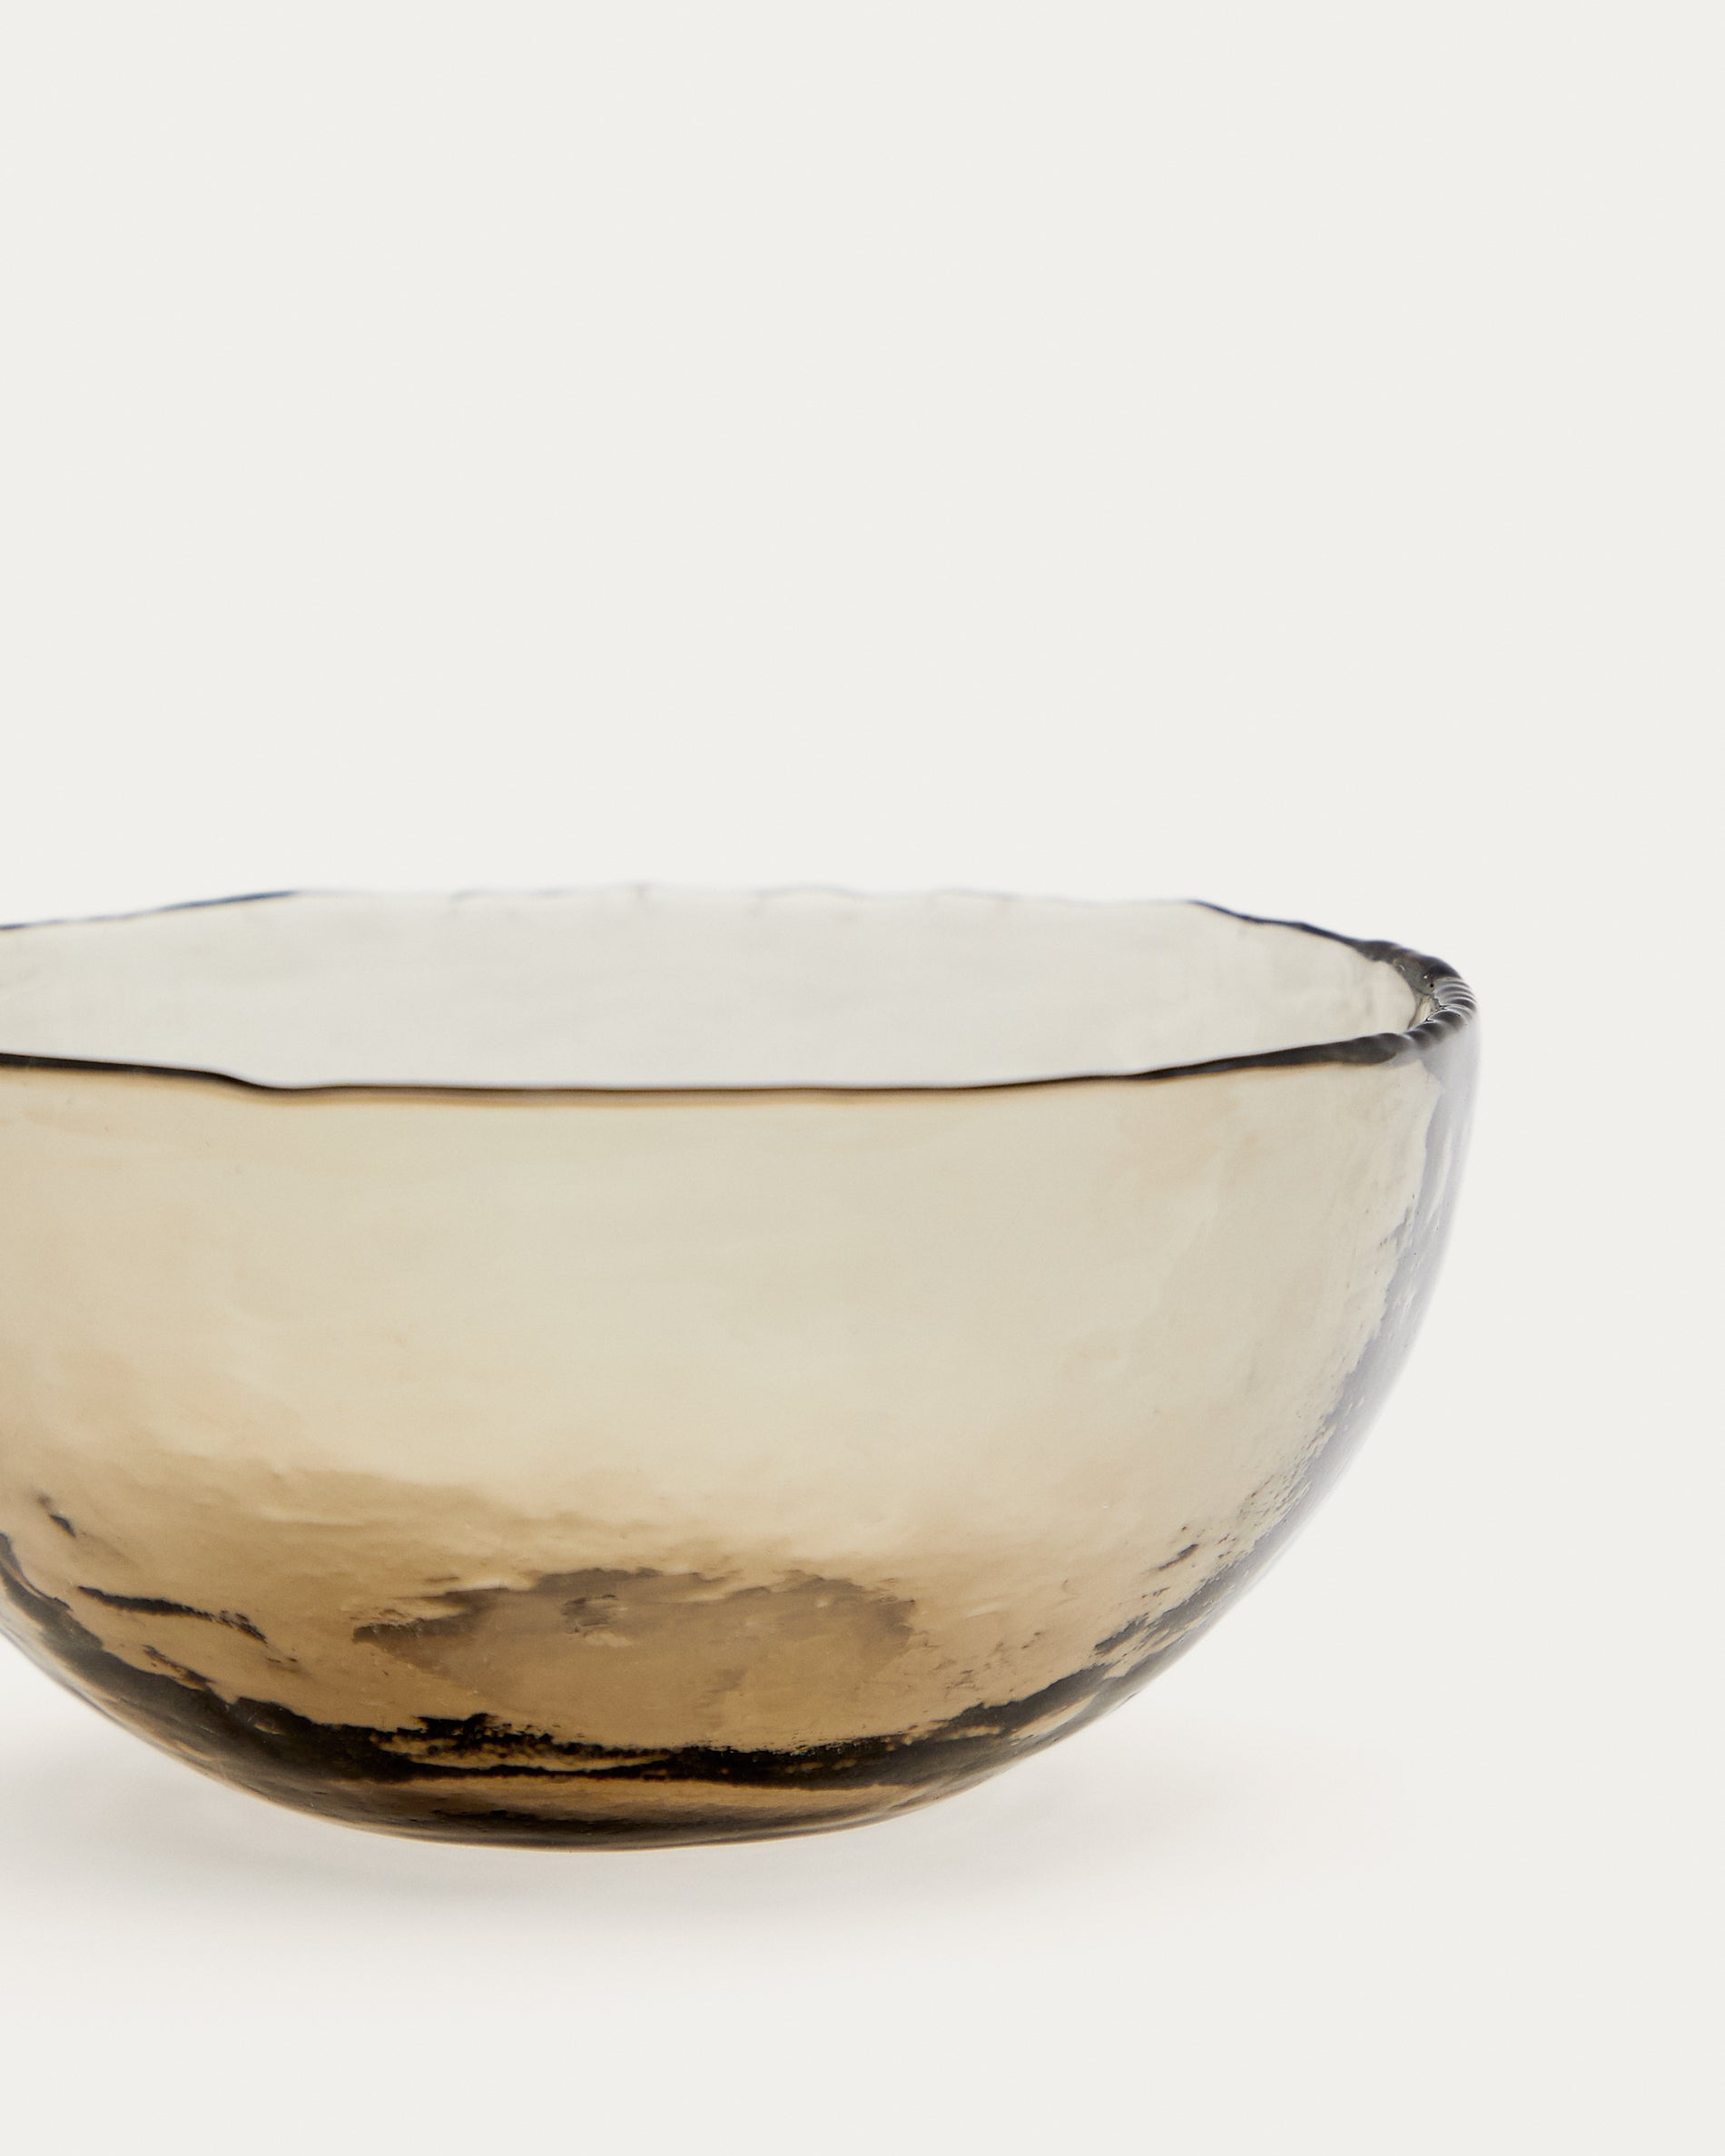 Sunera bowl, made of brown recycled glass